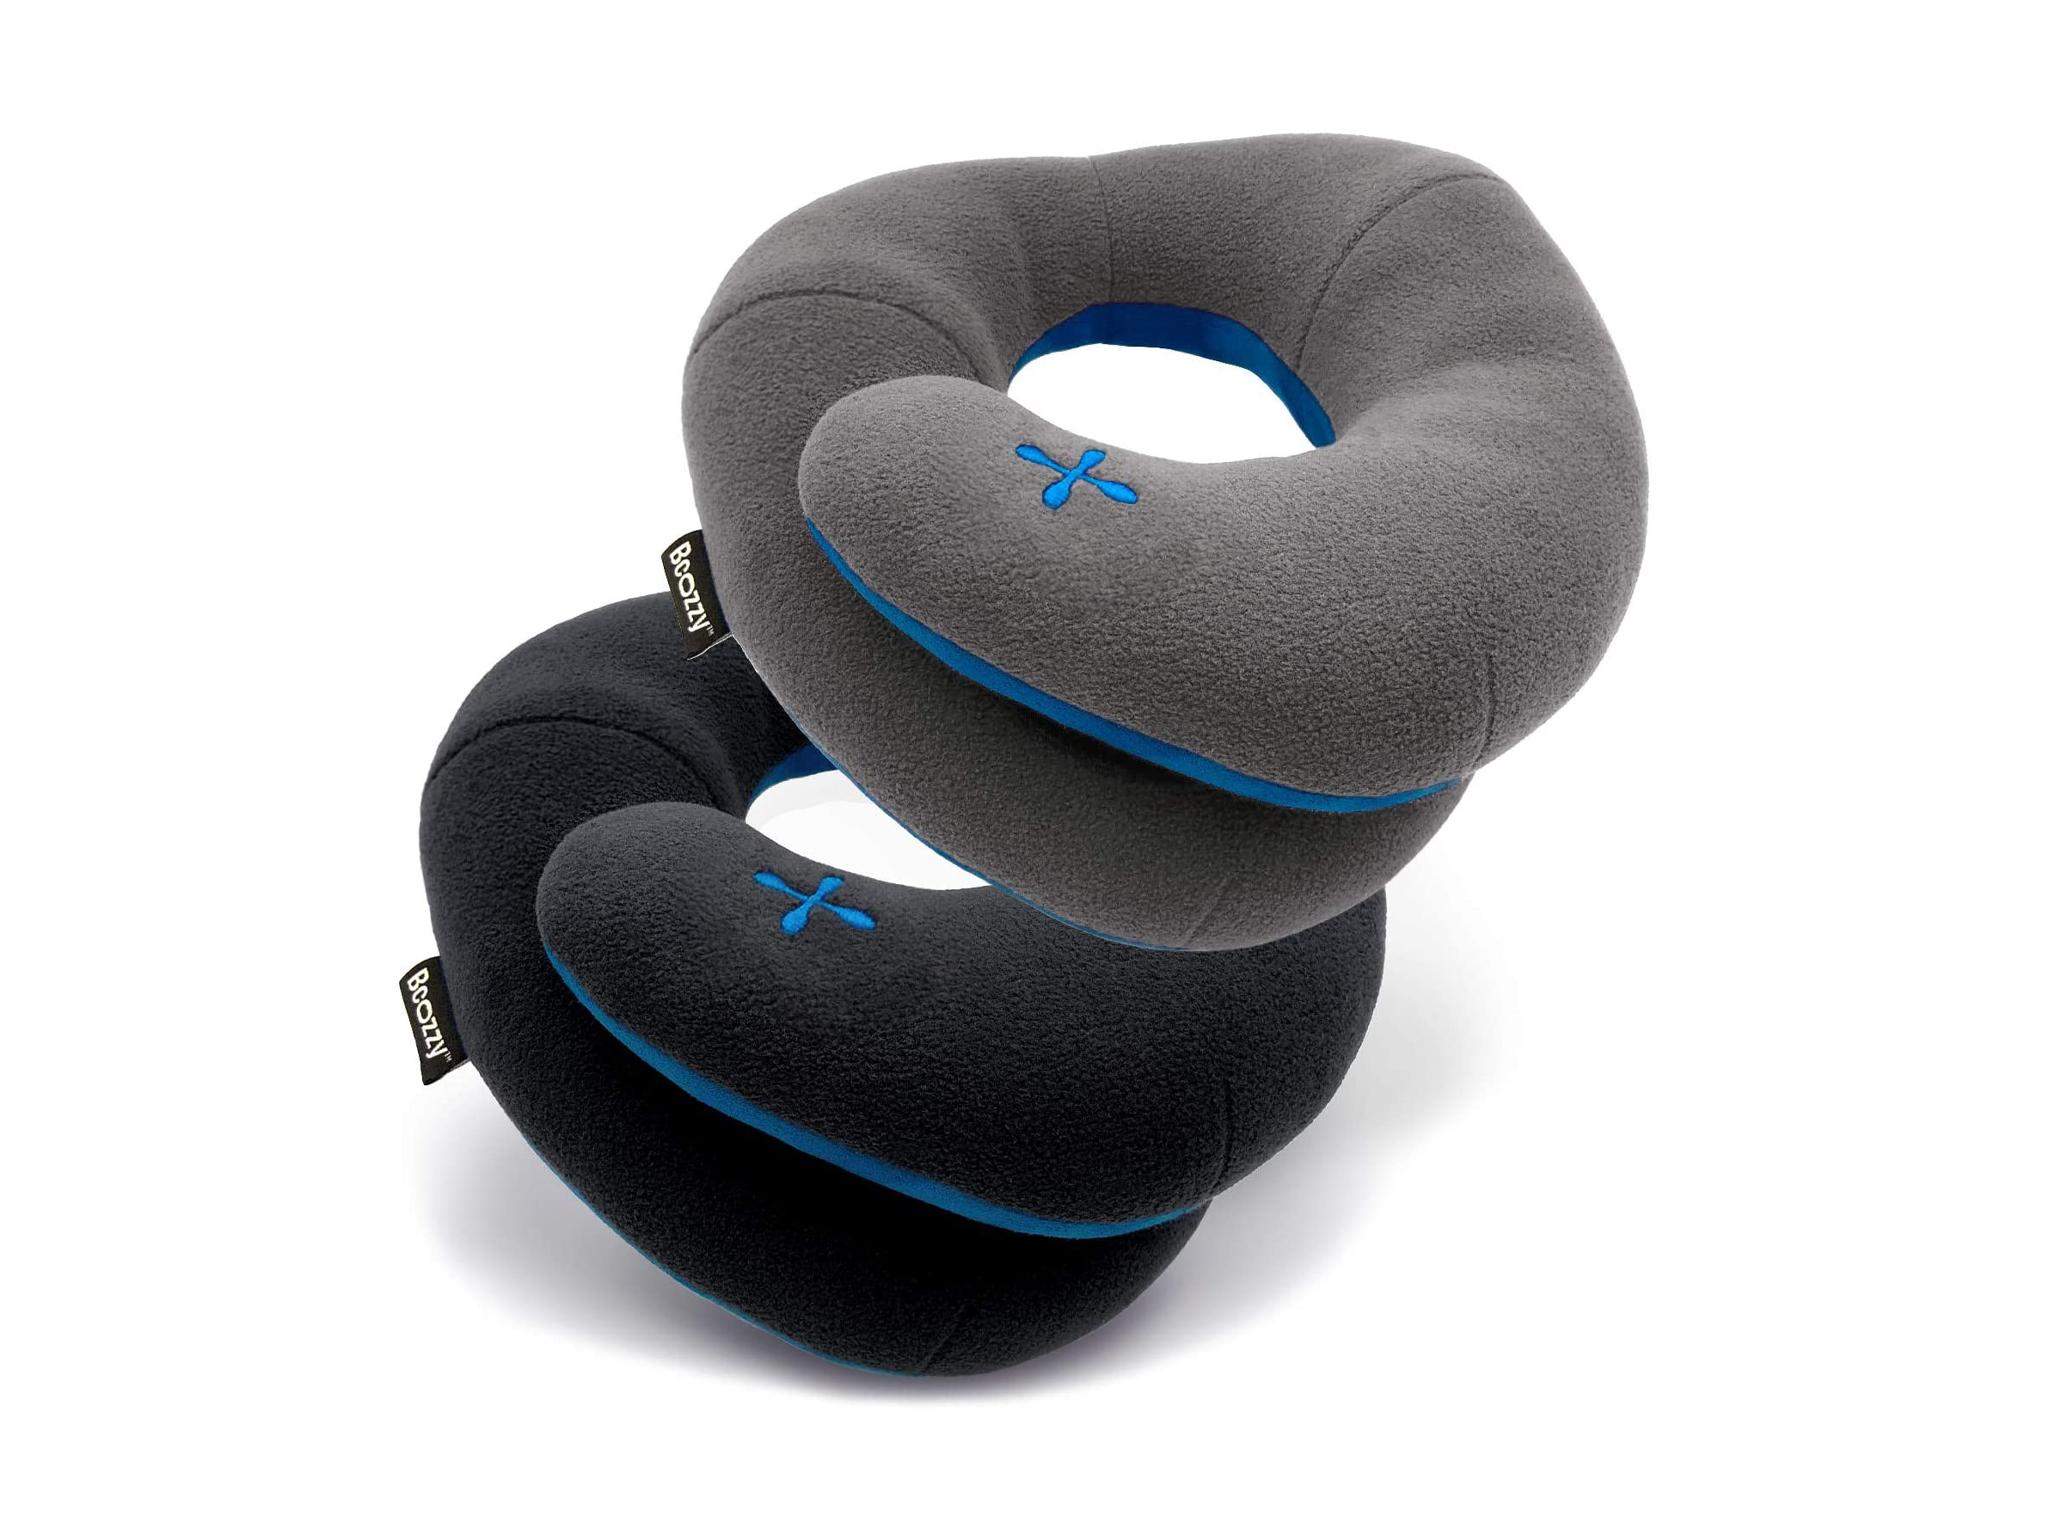 Luxury Memory Foam Travel Pillow Neck Support Head Rest Car Plane Holiday UK 